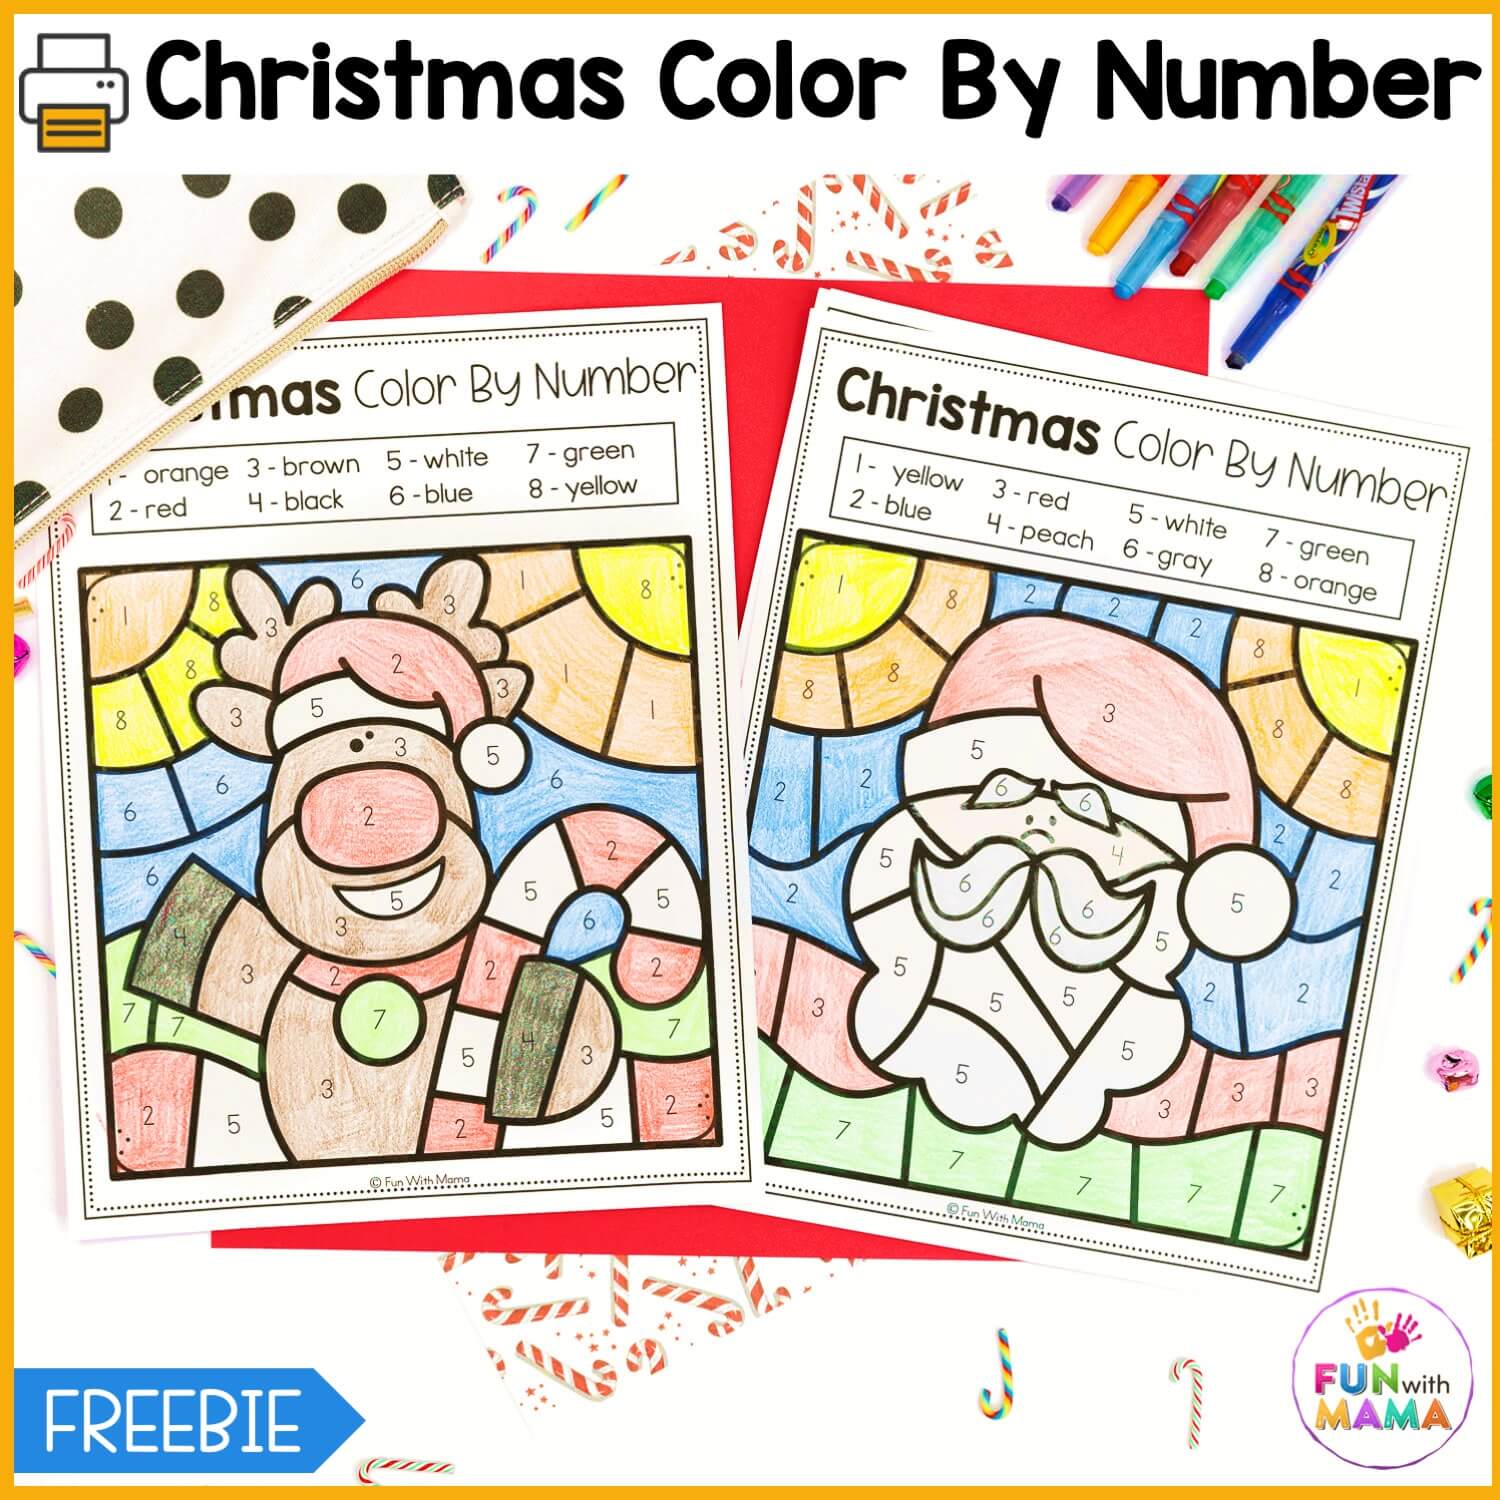 Color by number christmas pages colored in Santa and reindeer